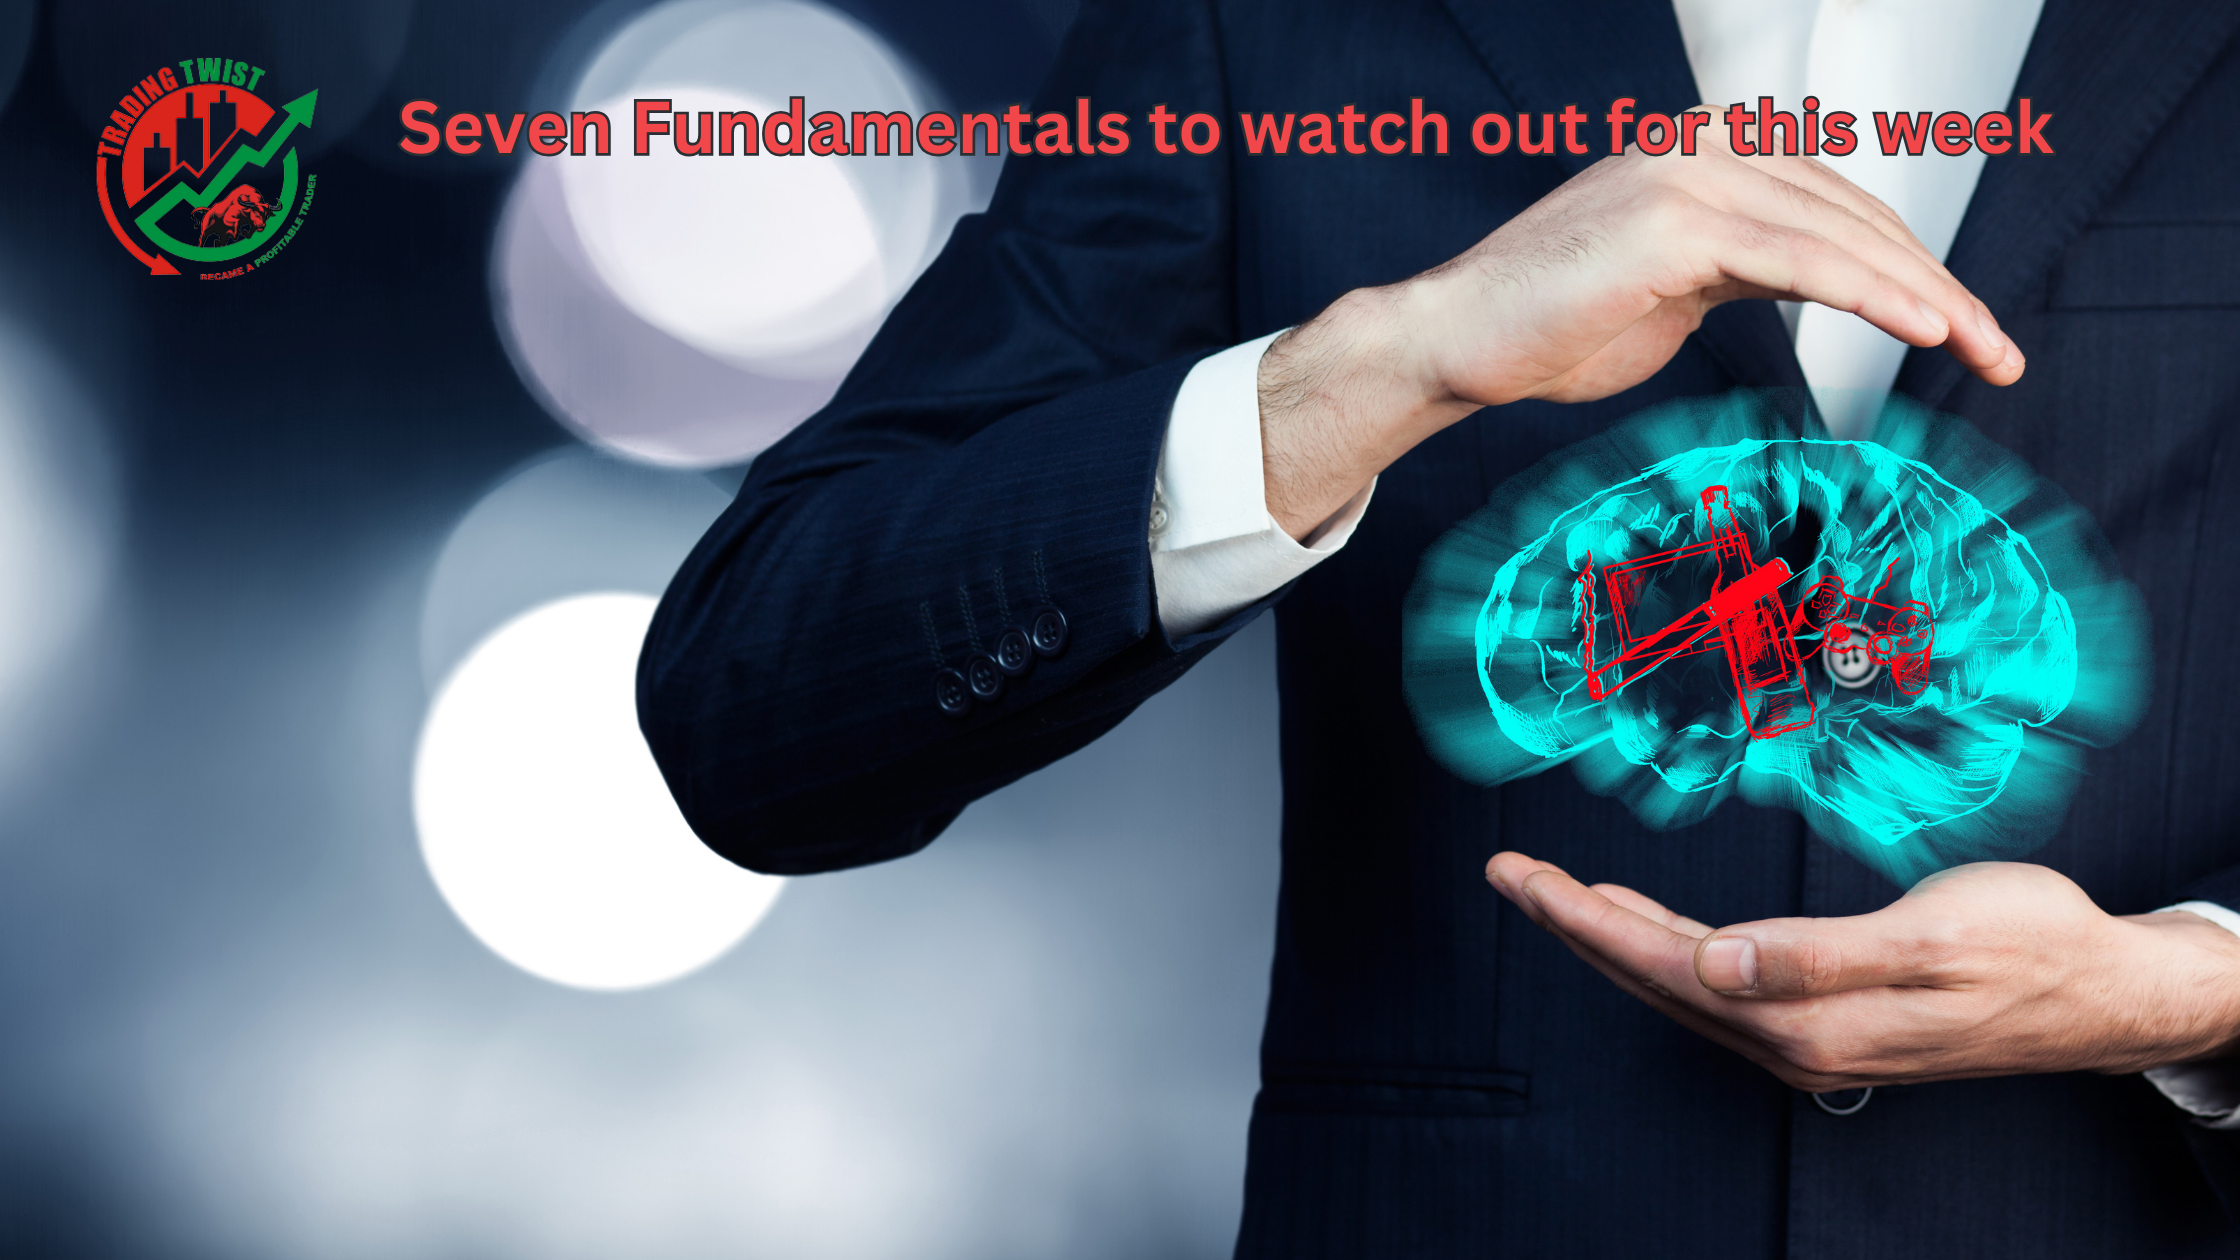 Seven Fundamentals to watch out for this week